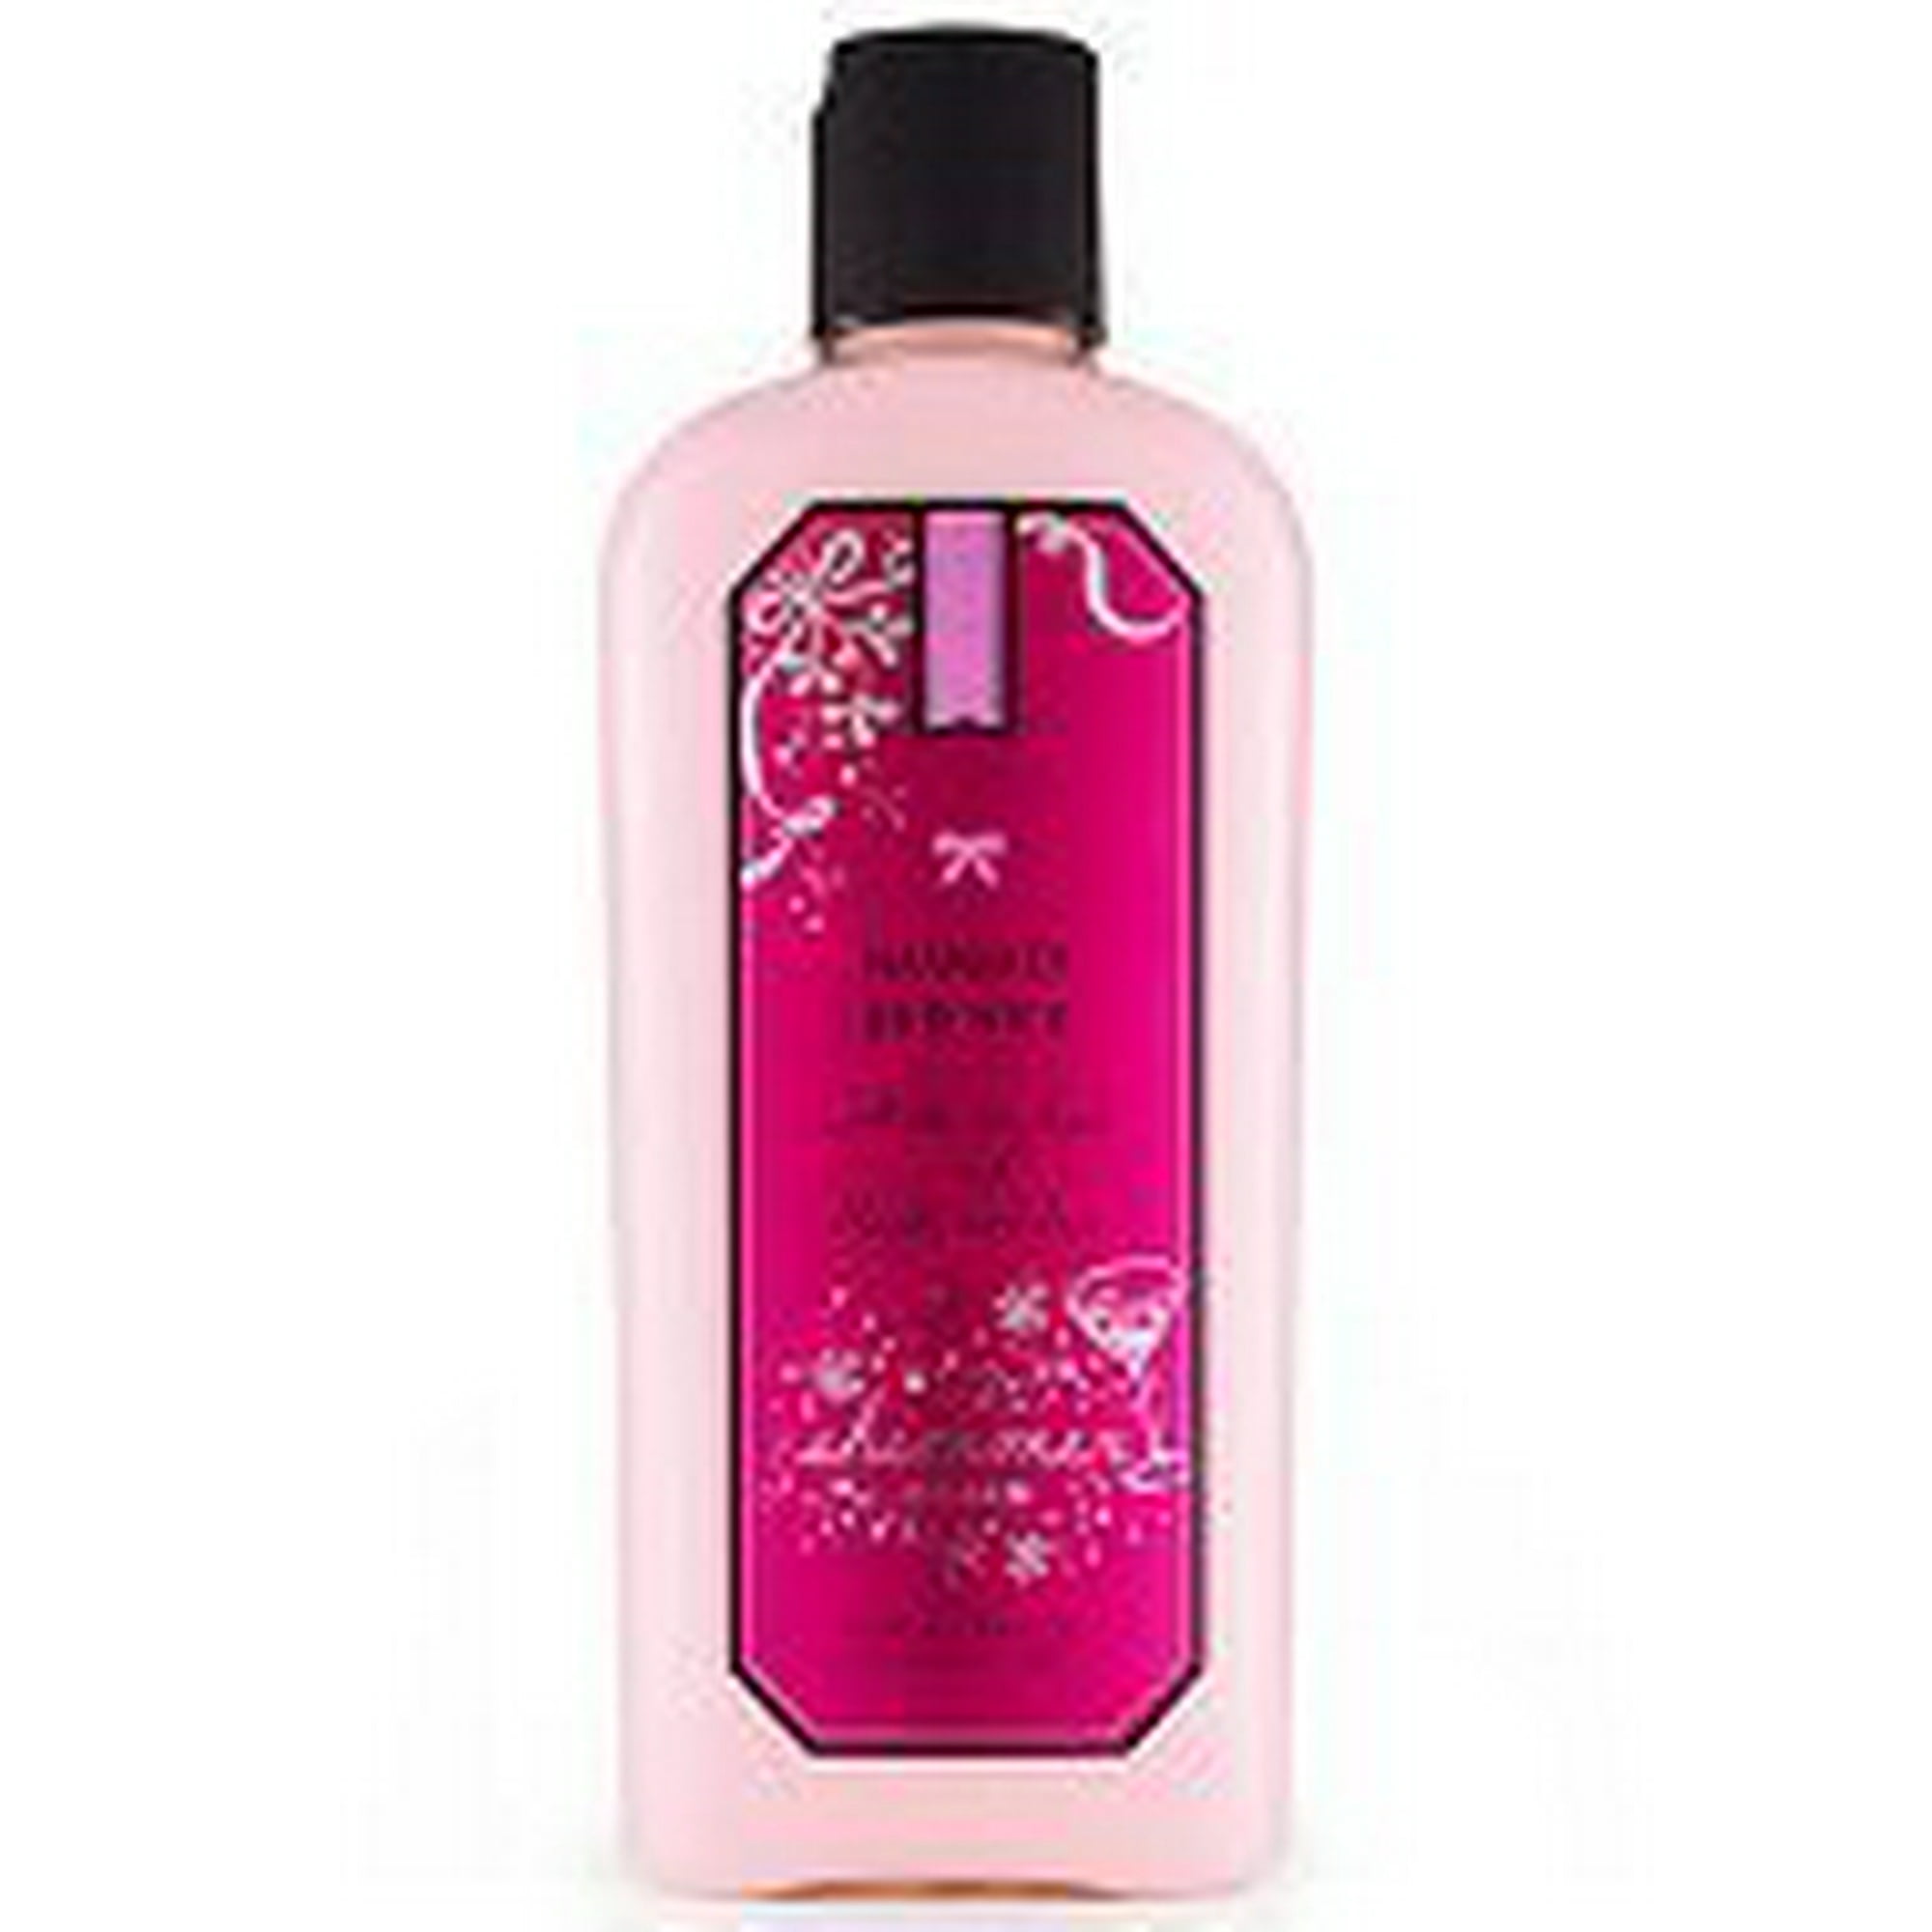 Victoria's Secret Secret Moments Limited Edition Naughty and Nice Body Lotion | Walmart Canada